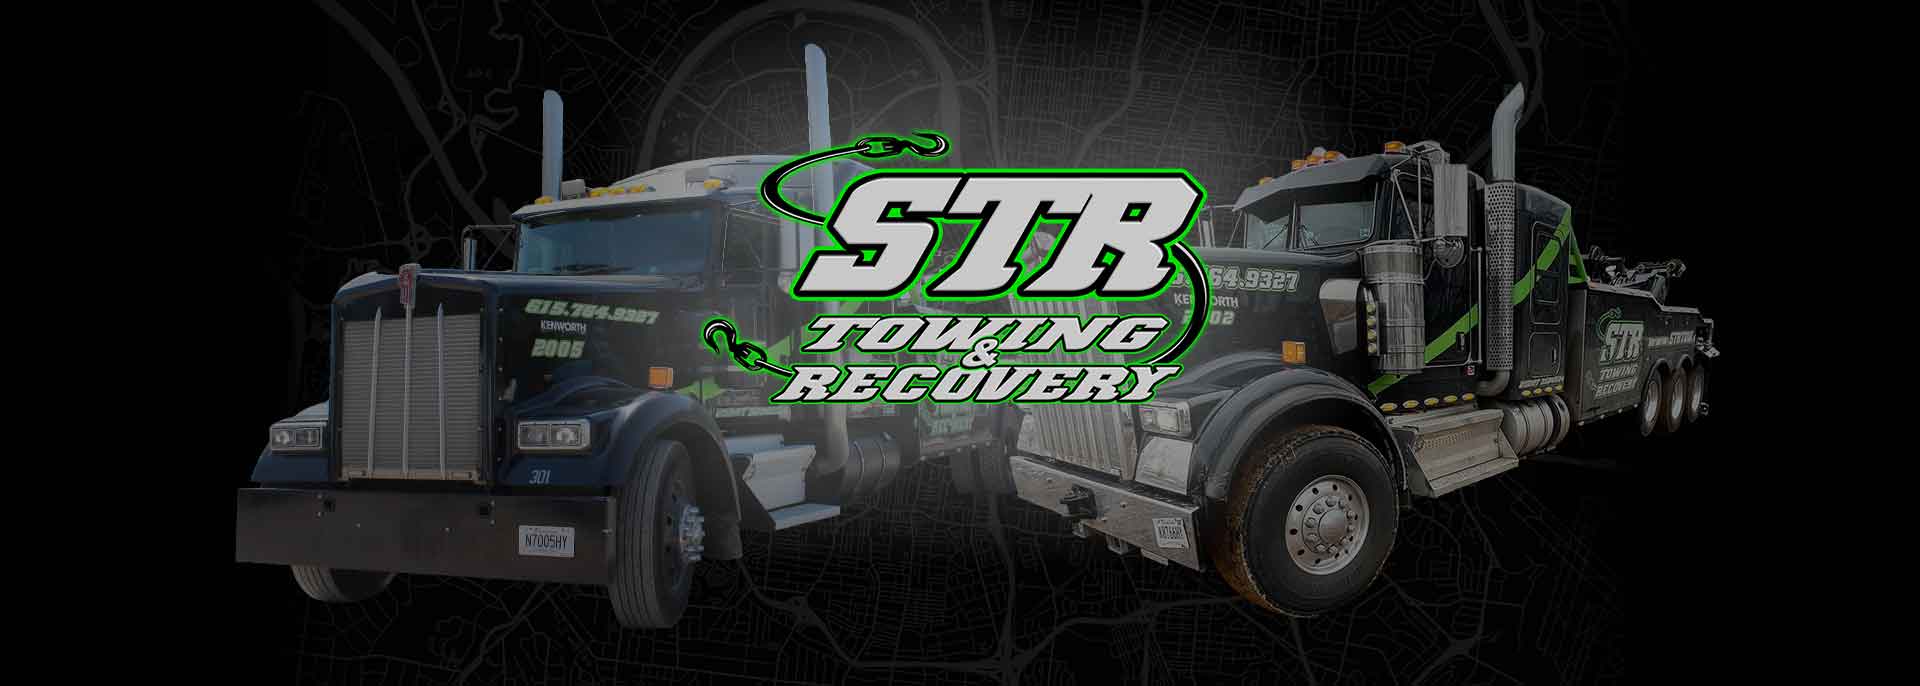 STR Towing & Recovery - 24/7 Towing Experts